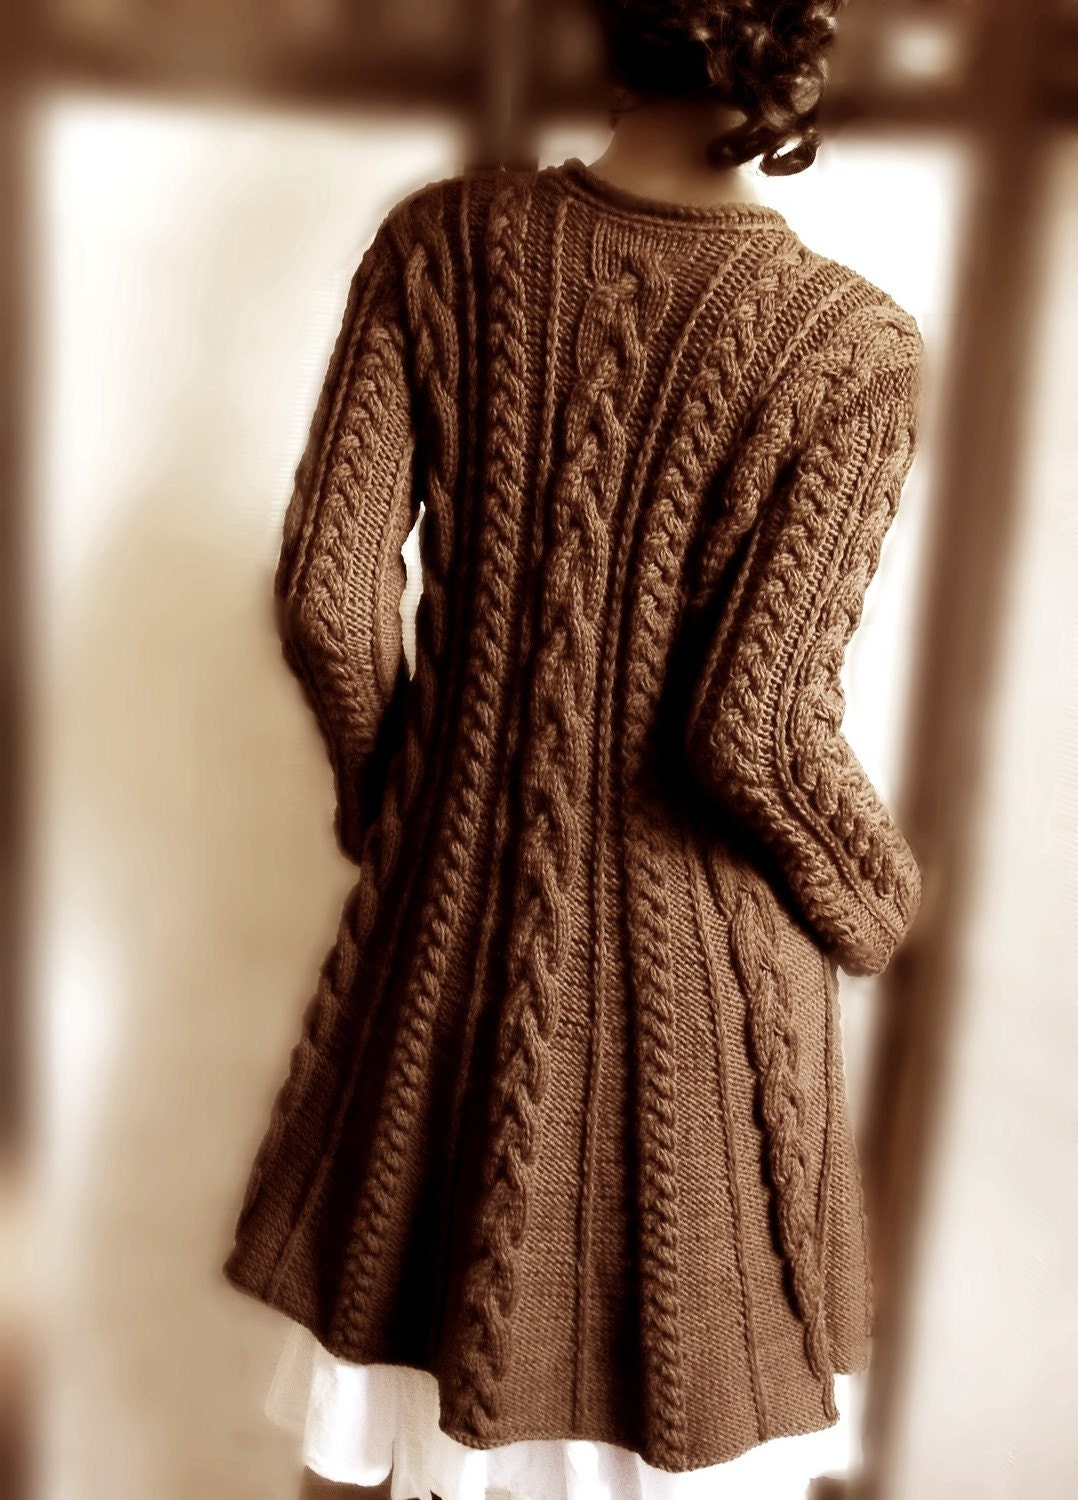 Handknitted Cabled A Line coat in pure wool Chocholate brown by Pilland